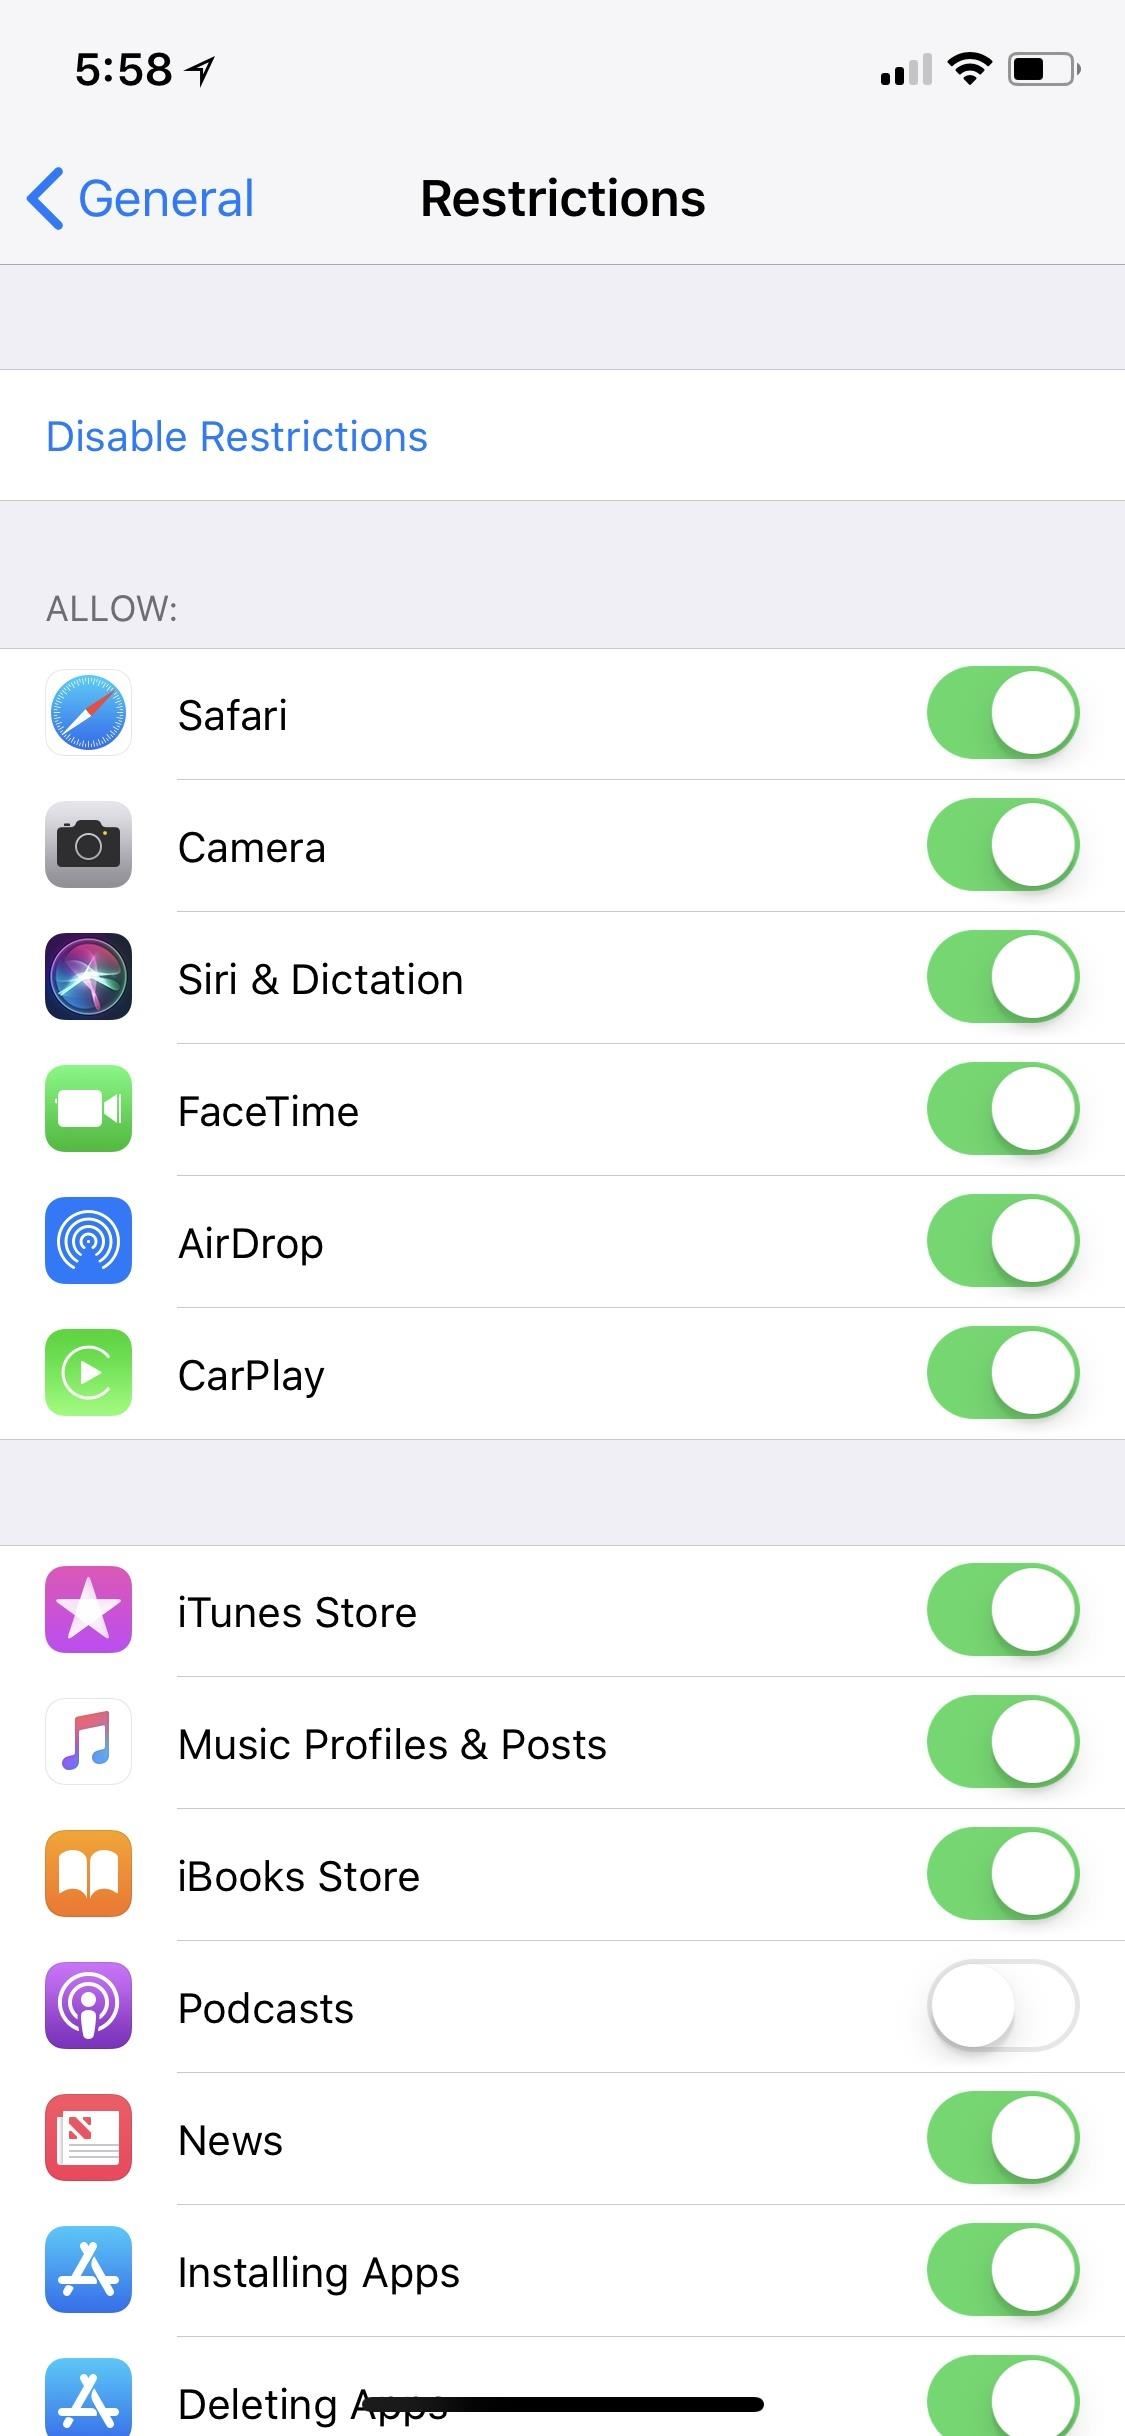 How to Find Missing Apps on Your iPhone